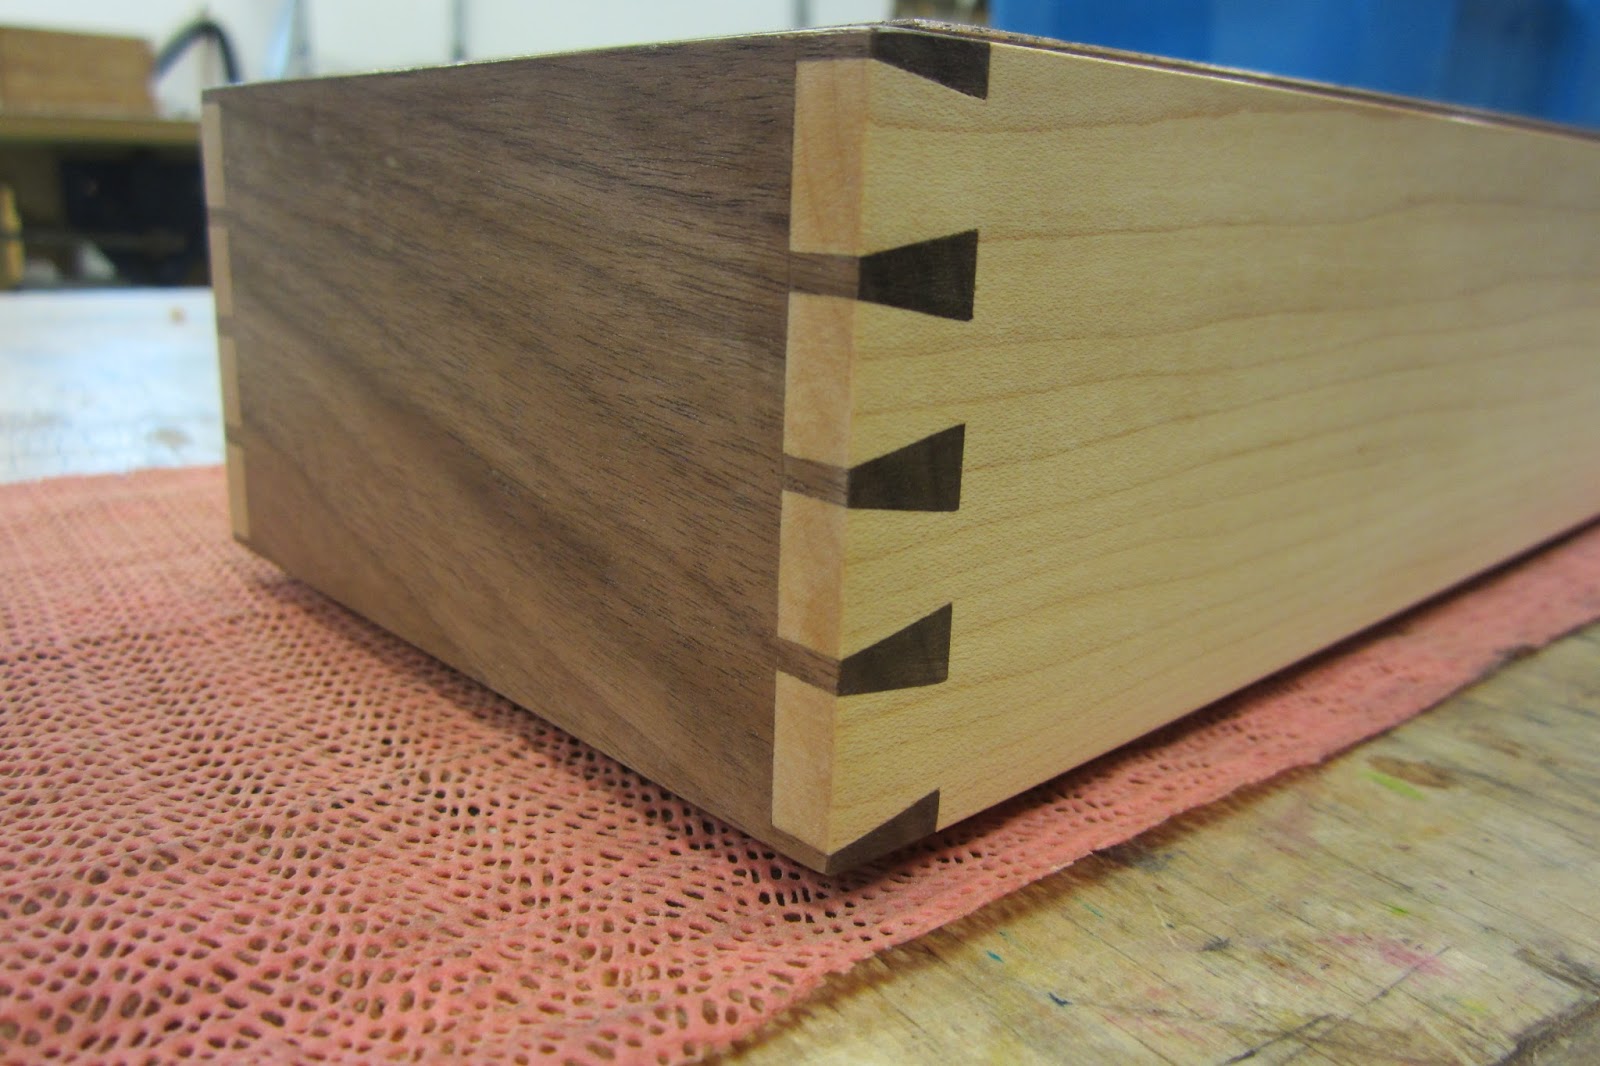 David Barron Furniture: Dovetail Course Available to Book now!